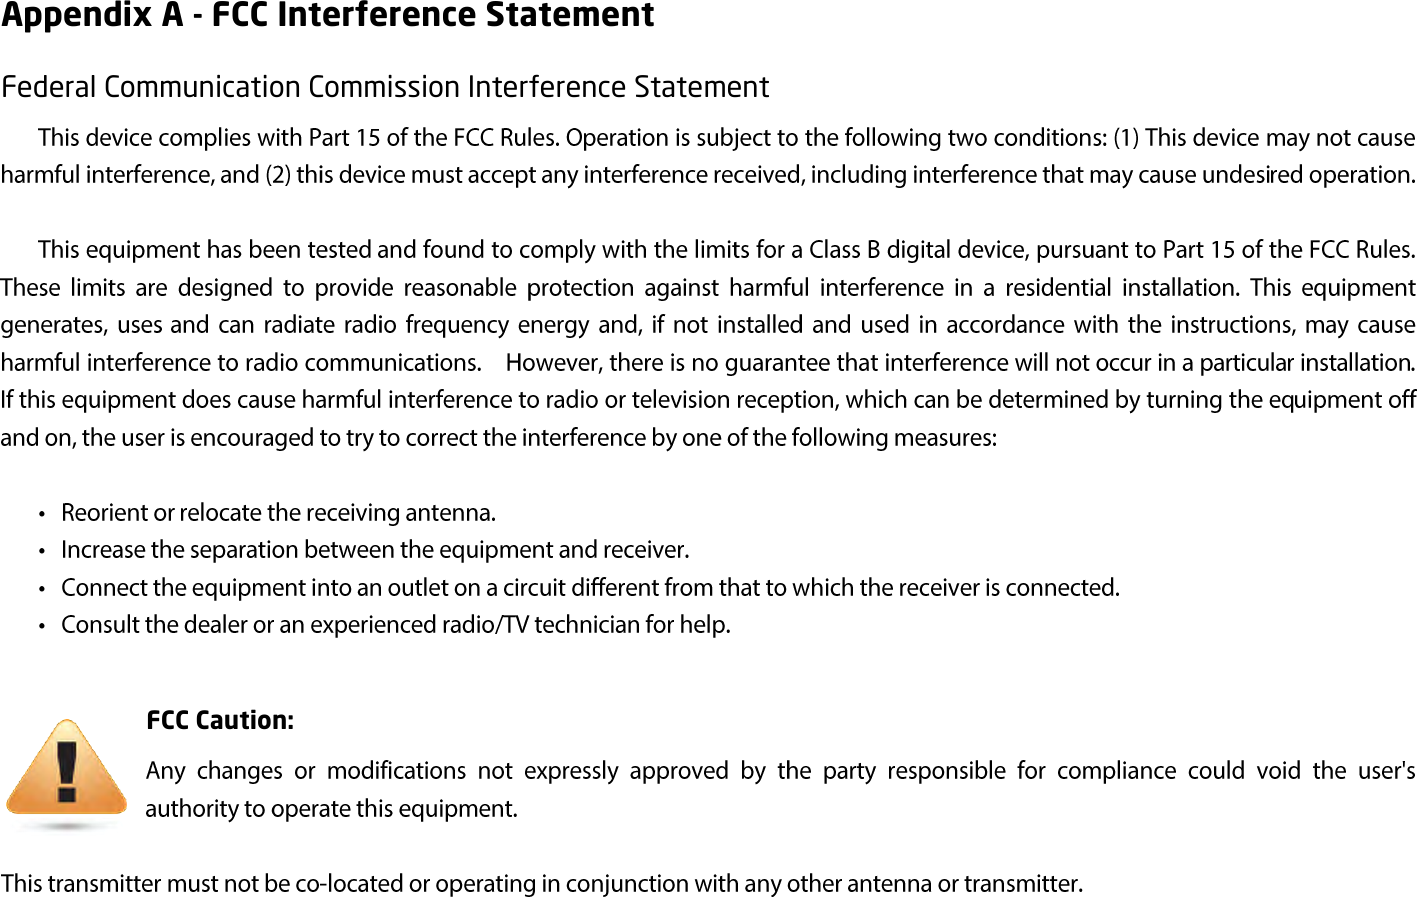 Appendix A - FCC Interference Statement Federal Communication Commission Interference Statement FCC Caution:   